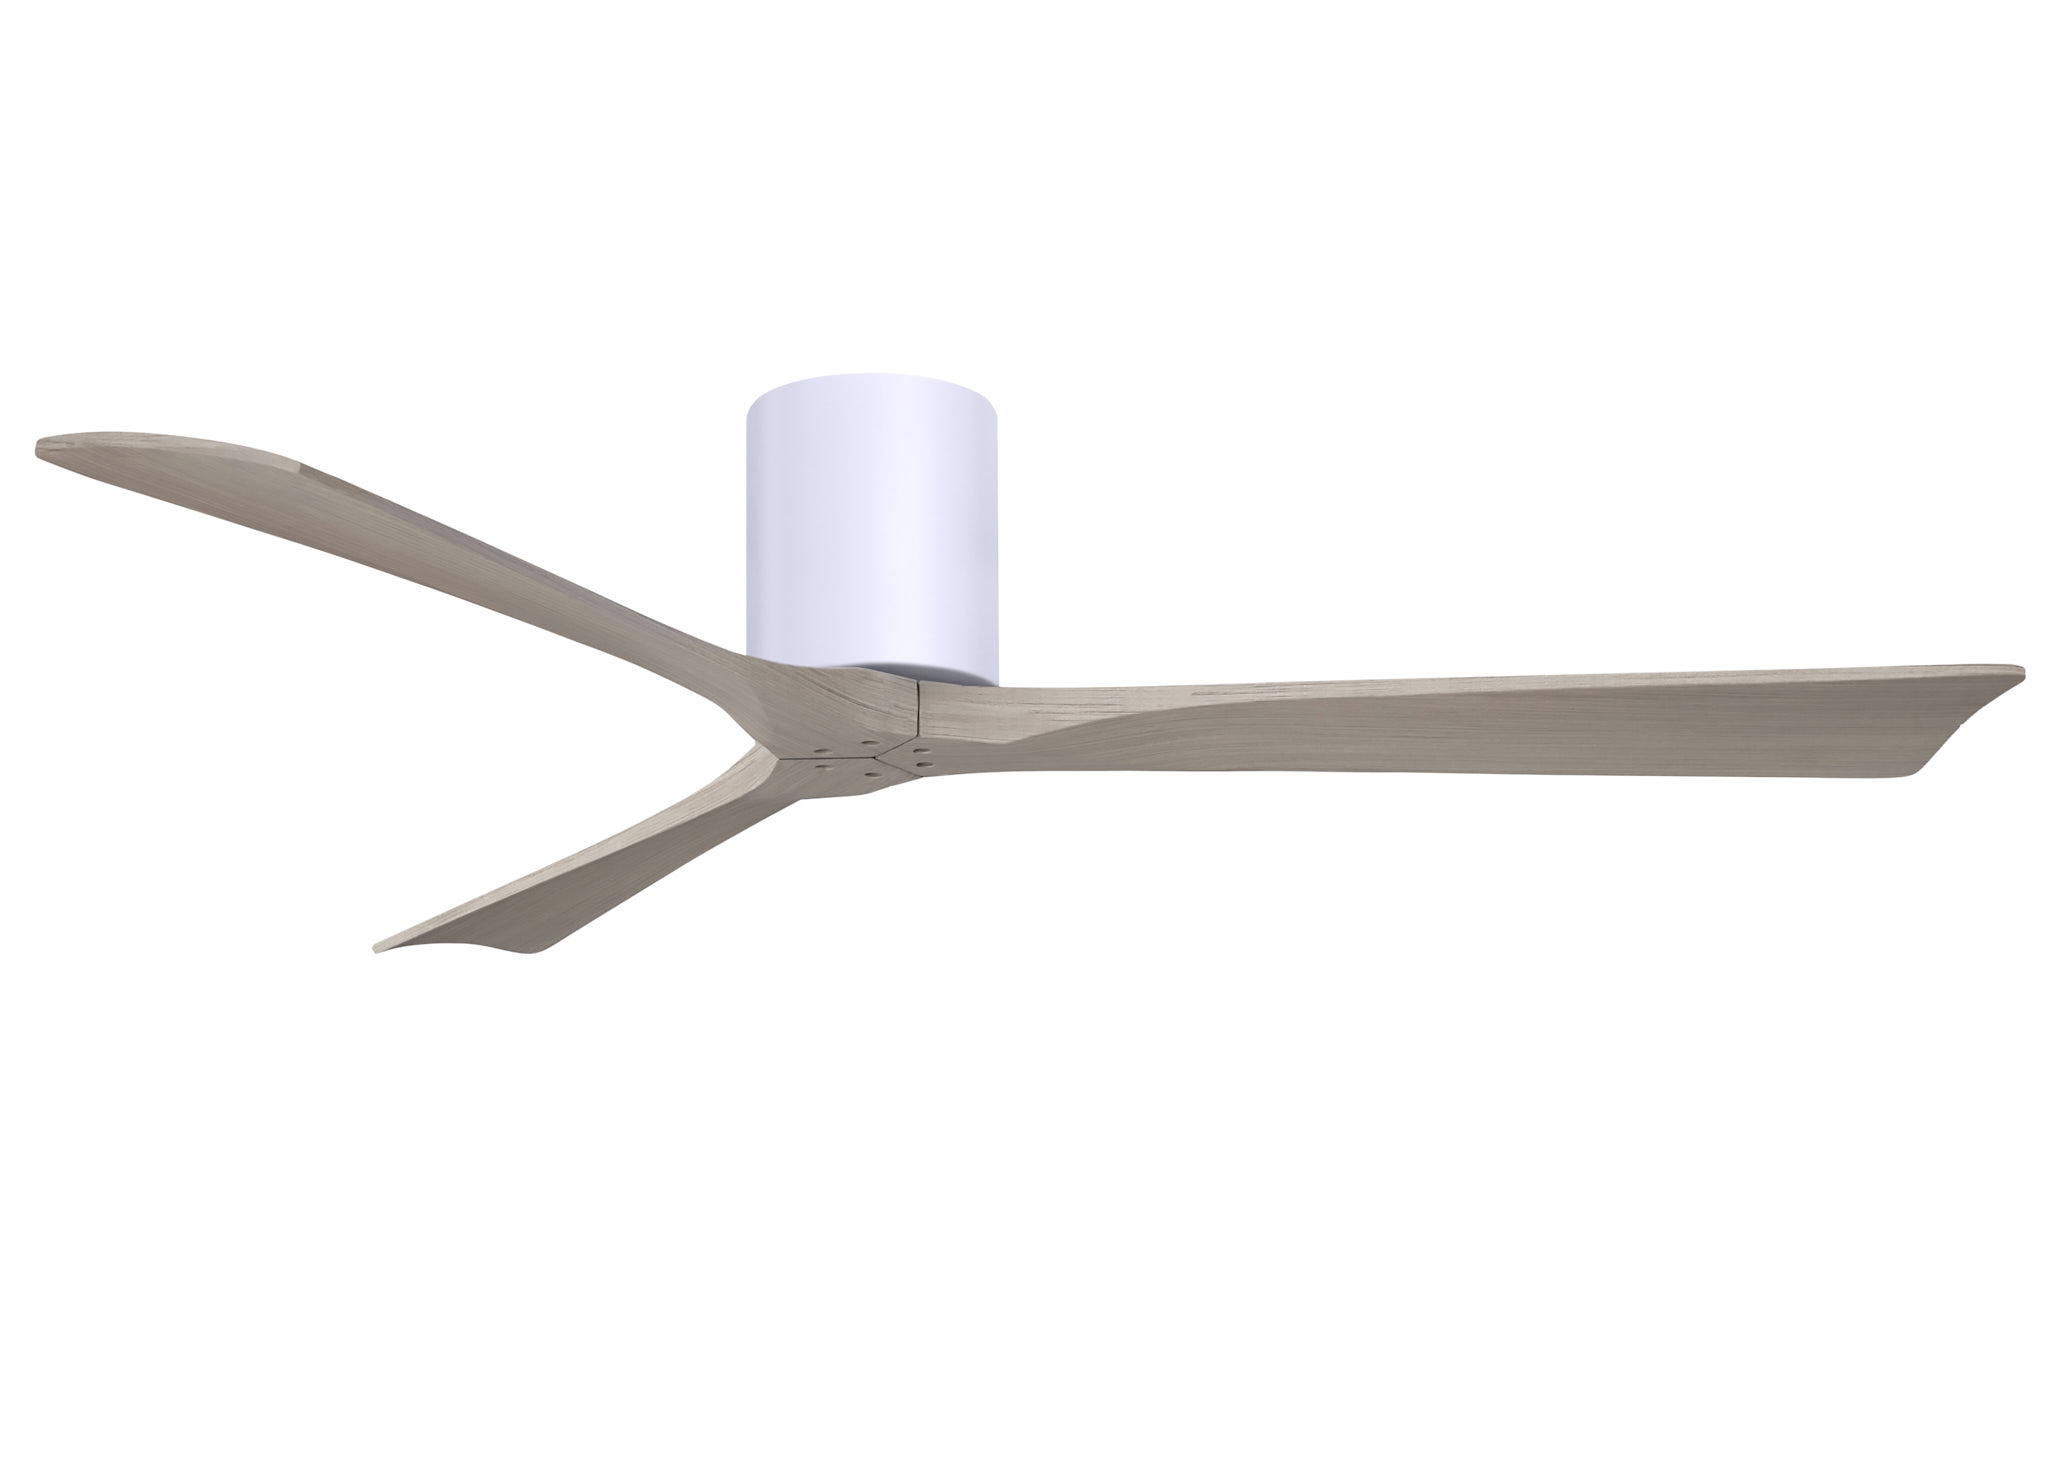 Irene-3H 6-speed ceiling fan in gloss white finish with 60